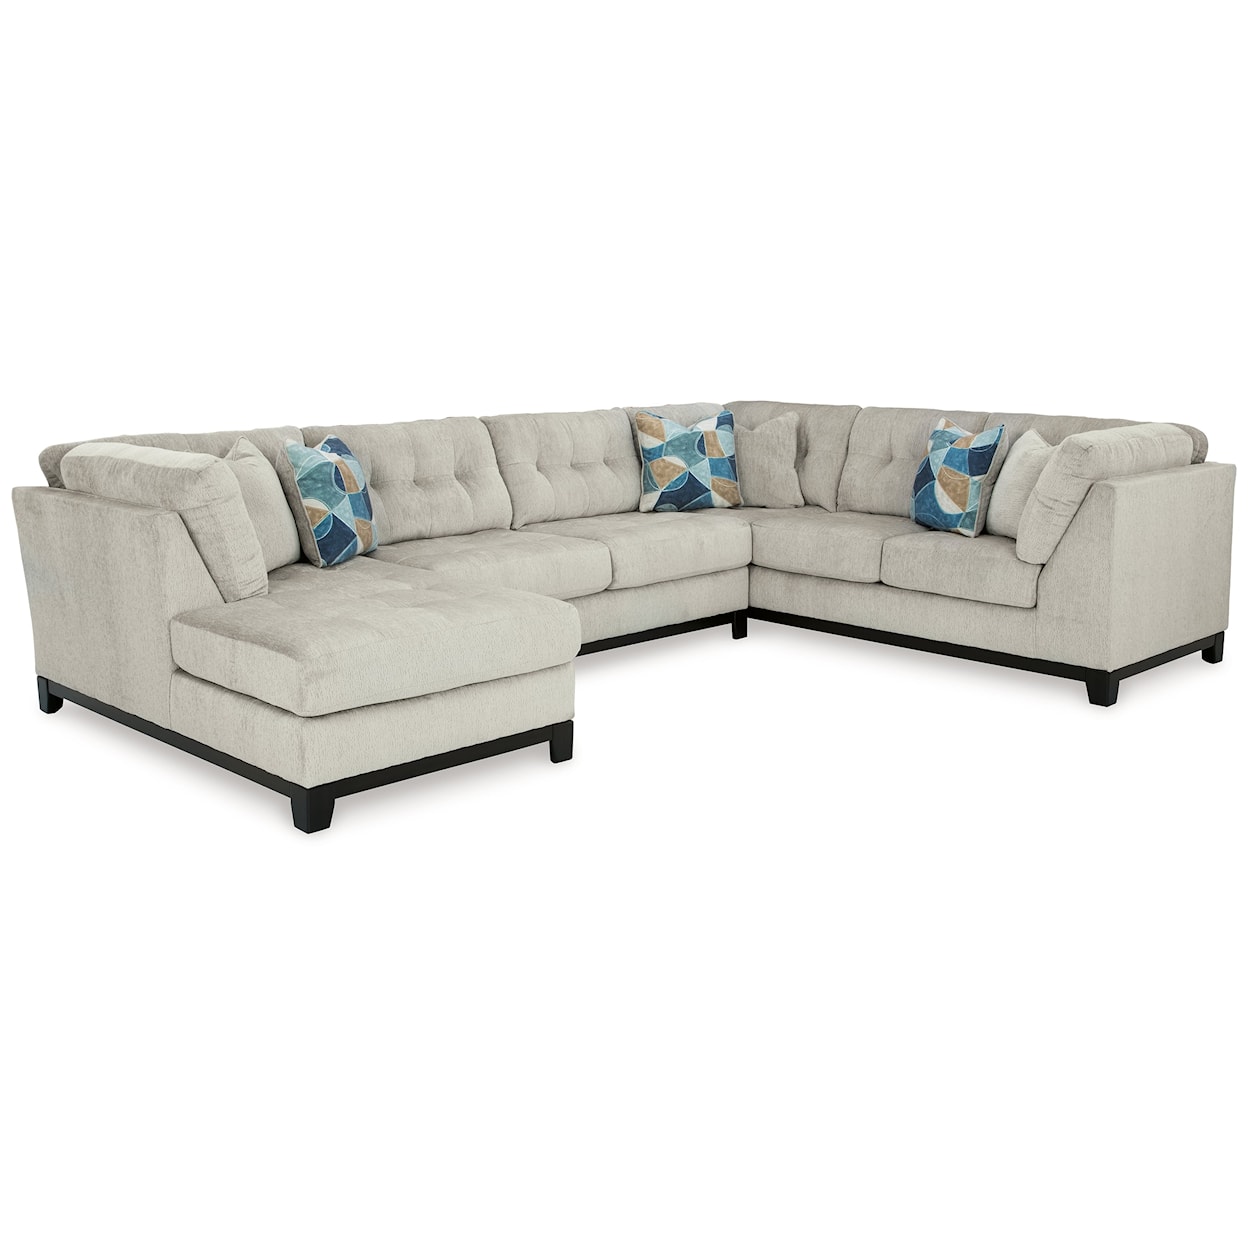 Benchcraft Maxon Place Sectional